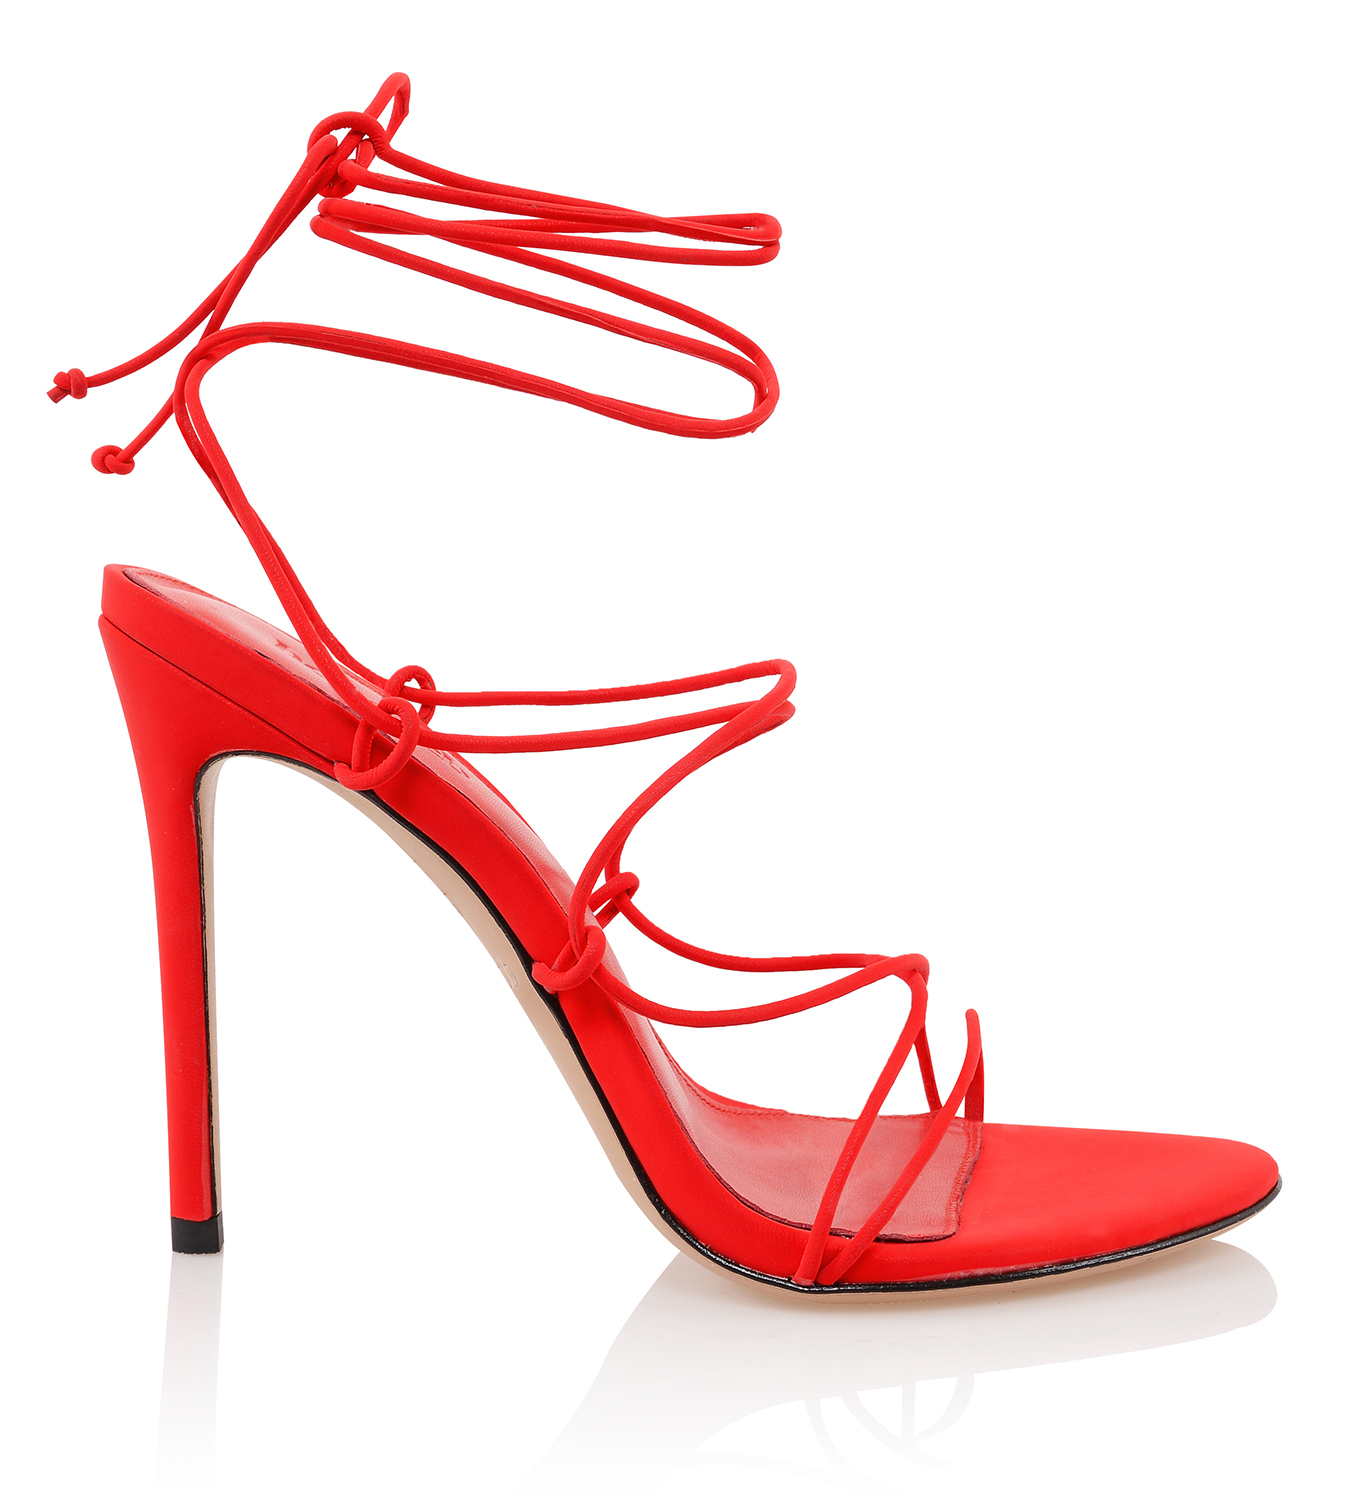 Shoes : 'Tao' 100 Scarlet Leather Barely There Sandal